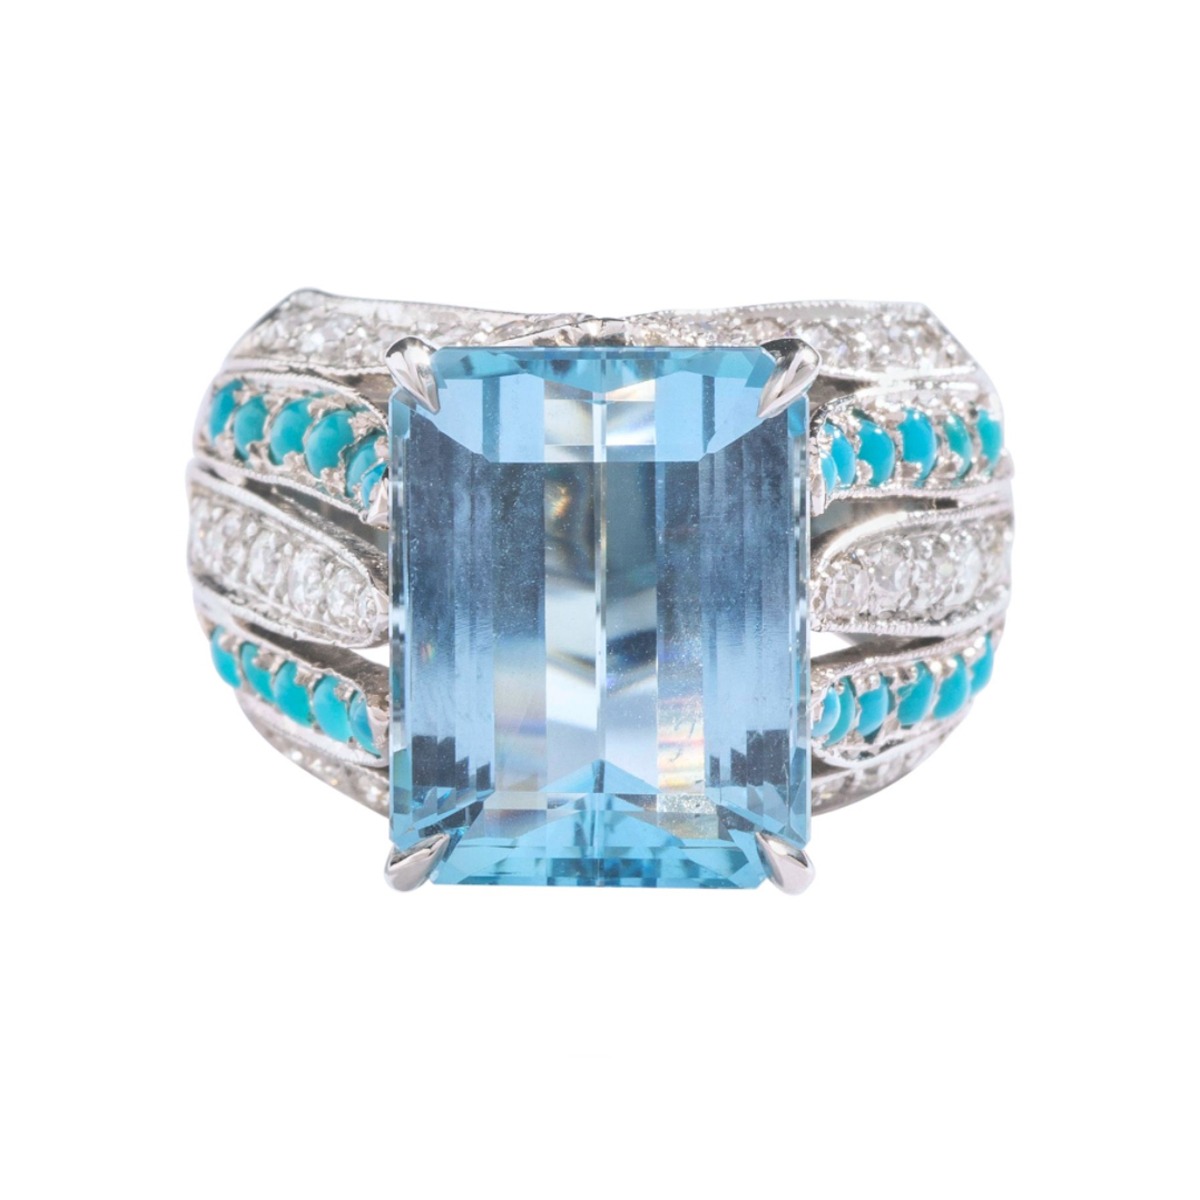 front view of the 9.75 carat Aquamarine centering a diamond and cabochon turquoise platinum ring.